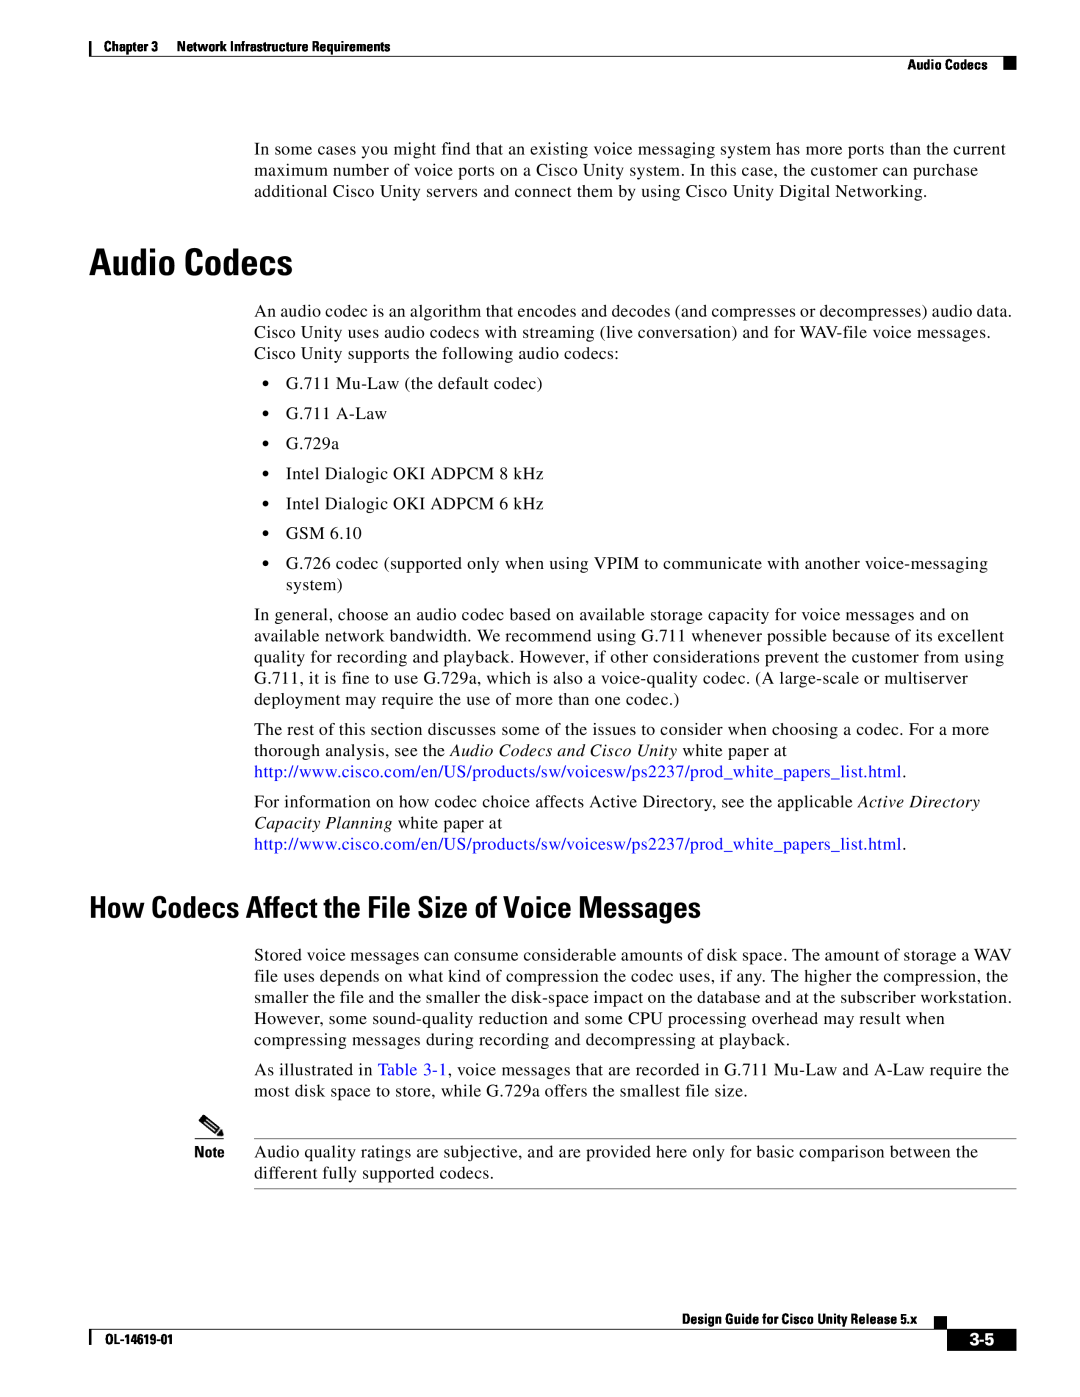 Cisco Systems OL-14619-01 manual Audio Codecs, How Codecs Affect the File Size of Voice Messages 